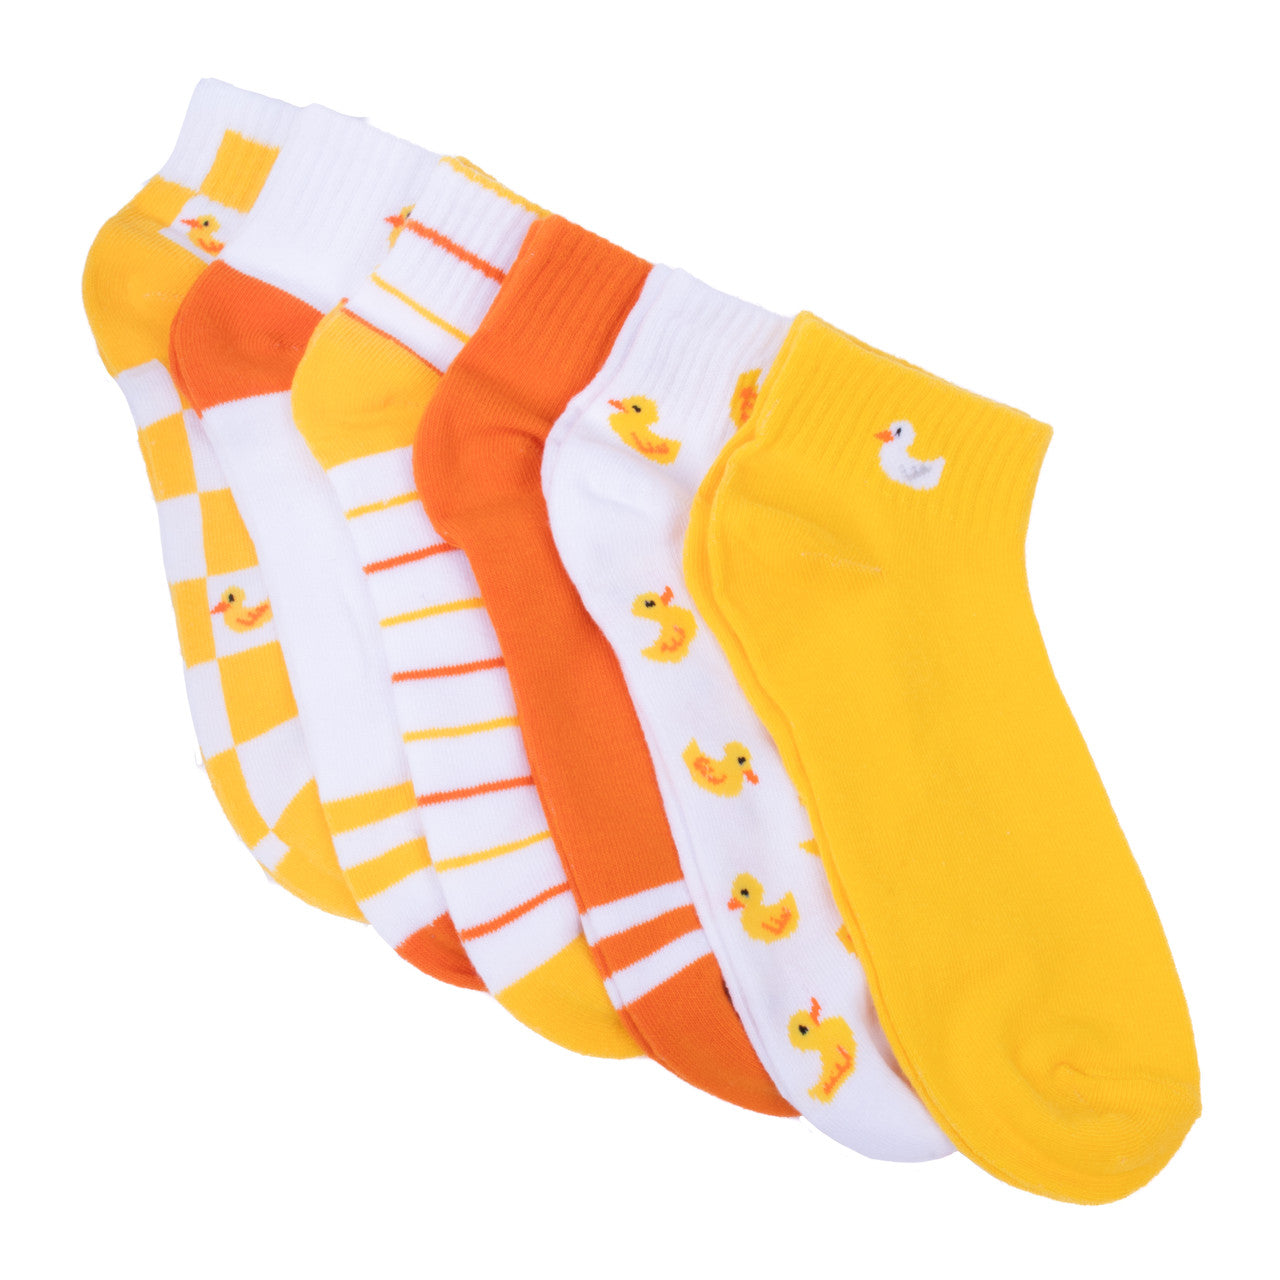 Women's Low Cut Socks Six Pairs Duck Embroidered Design Mom Gift Assorted Yellow White Orange Design 6 Pre Pack Ribbed Socks Ladies Socks